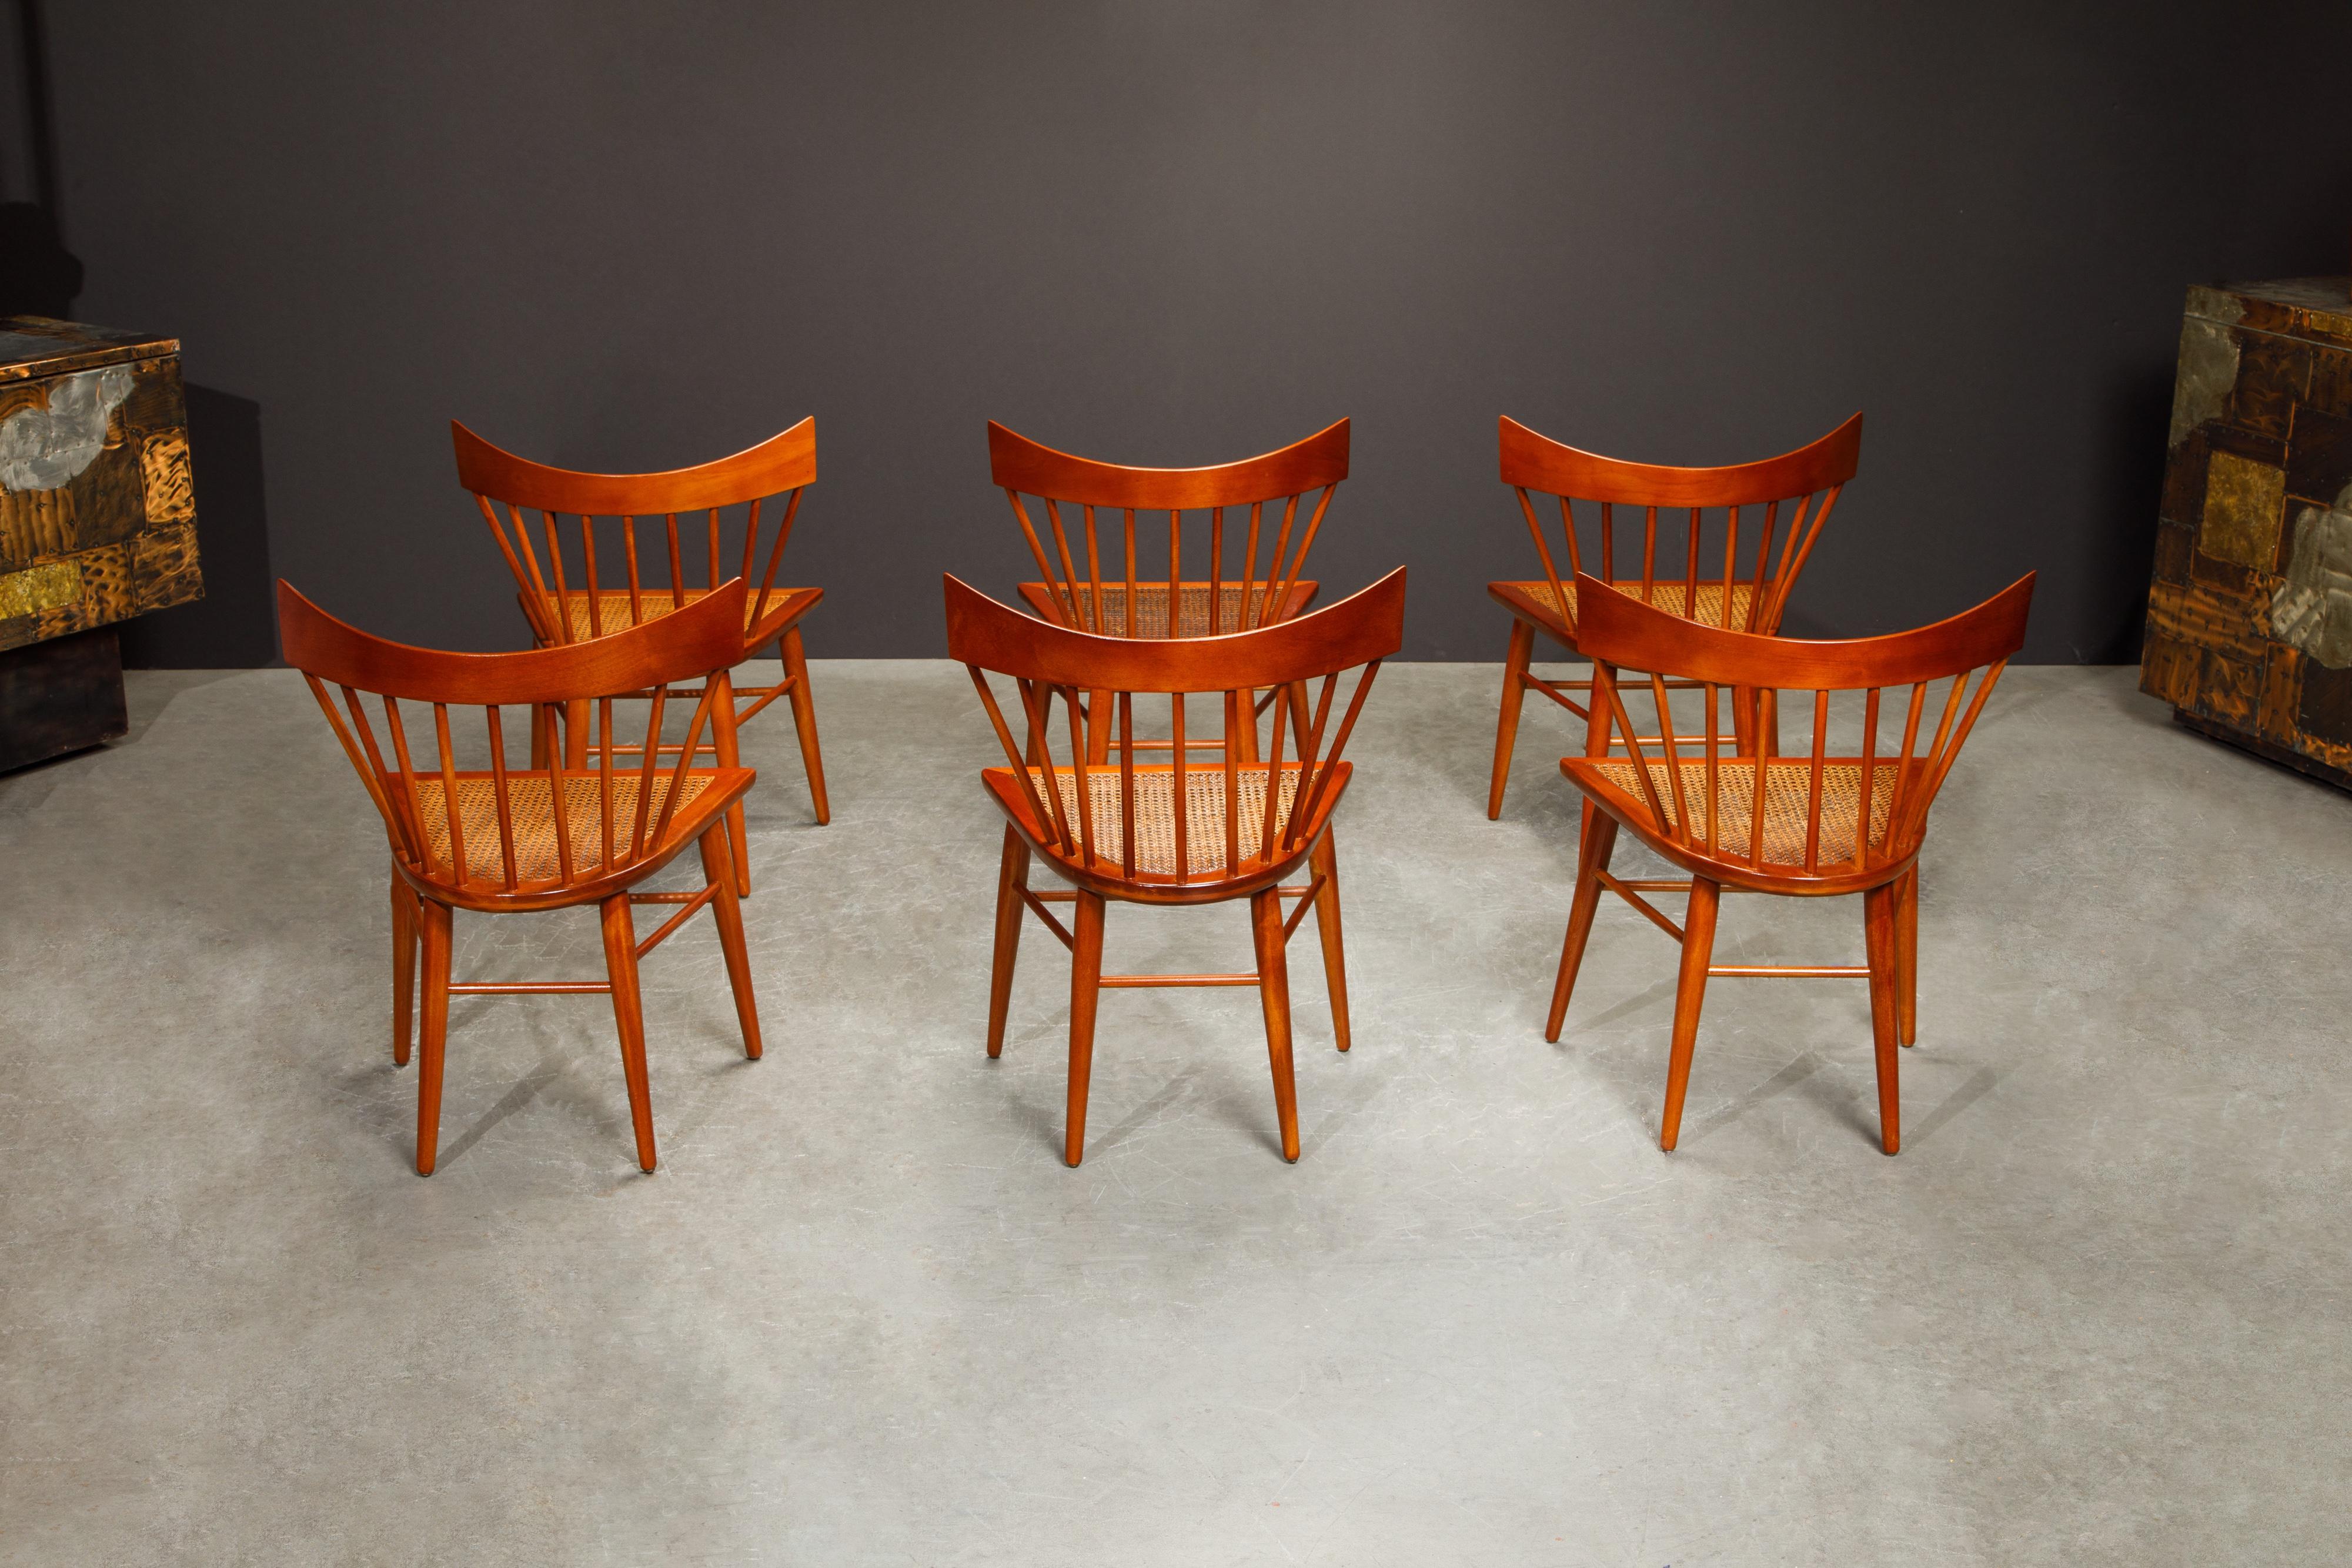 Fabric 'Yucatan' Dining Chairs by Edmond Spence for Industria Mueblera, 1960s Signed For Sale